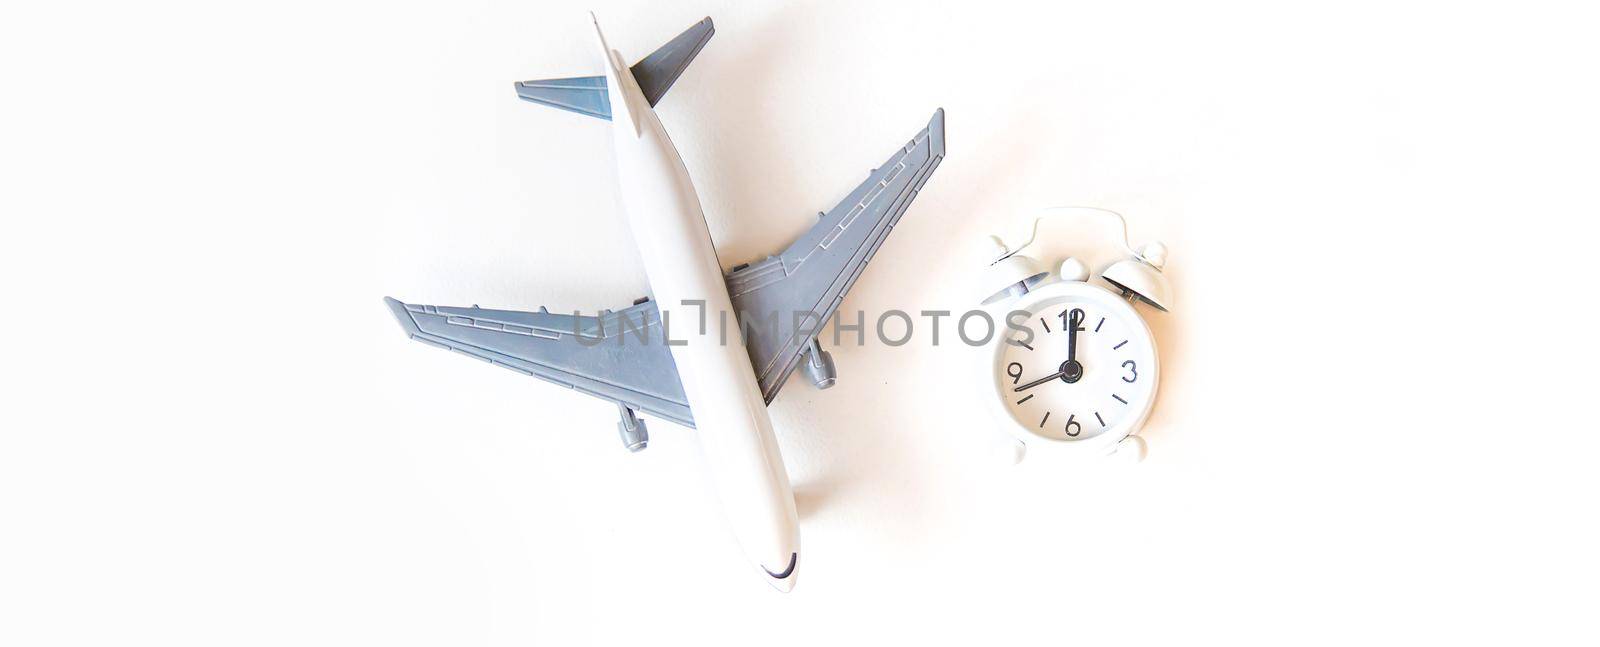 airplane isolate on a white background. Selective focus.